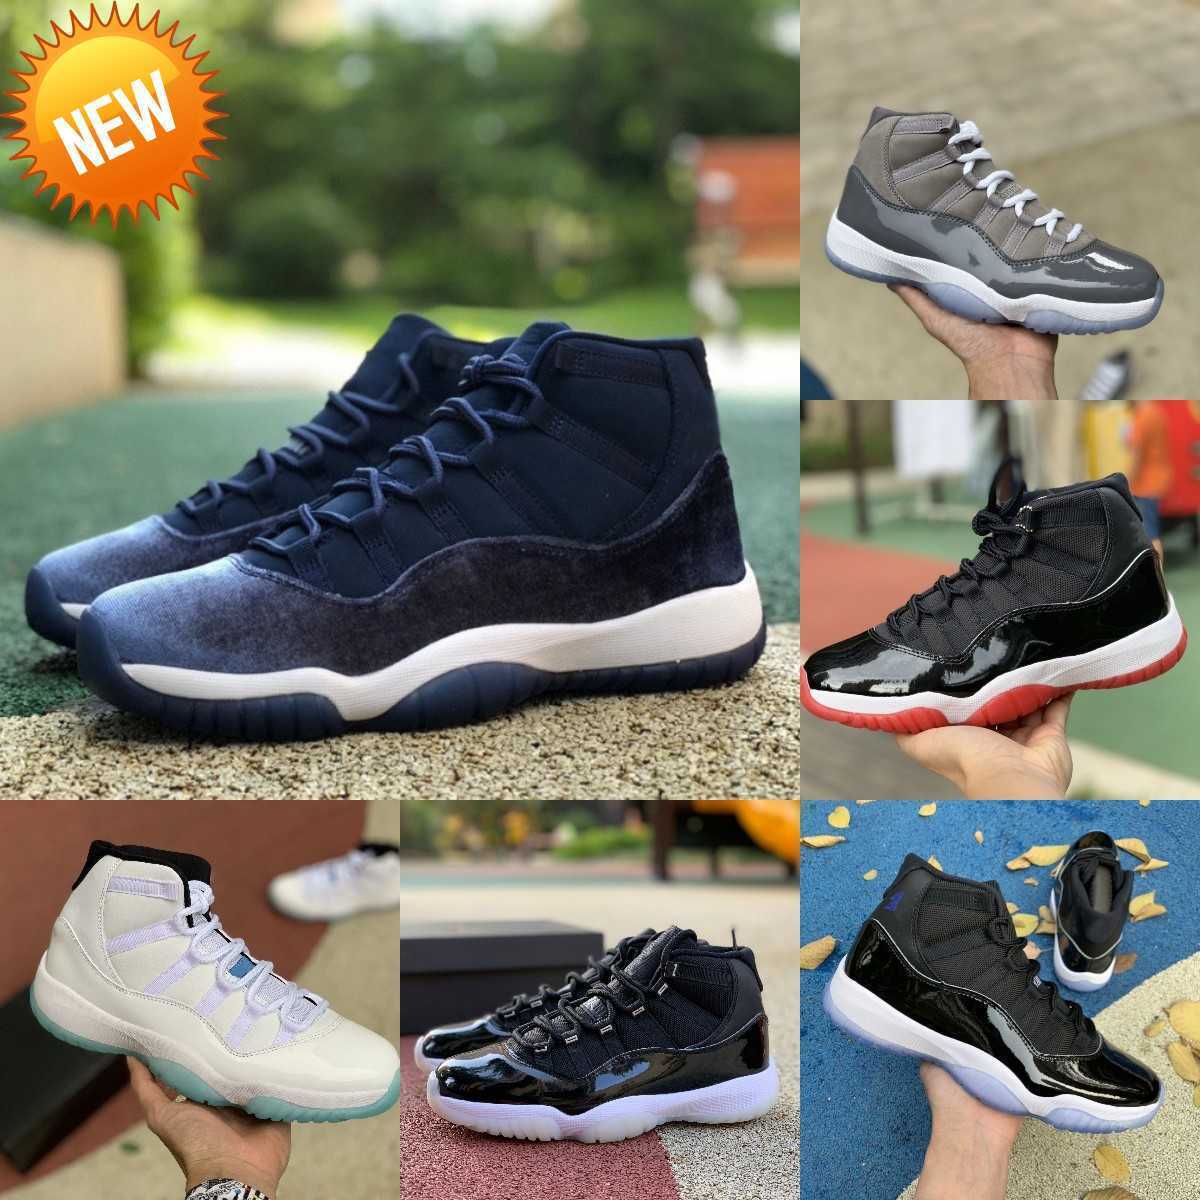 

NEW Jumpman Jubilee 11 11s High Basketball Shoes COOL GREY Legend Blue Midnight Navy Playoffs Bred Space Jam Gamma Blue Easter, Please contact us